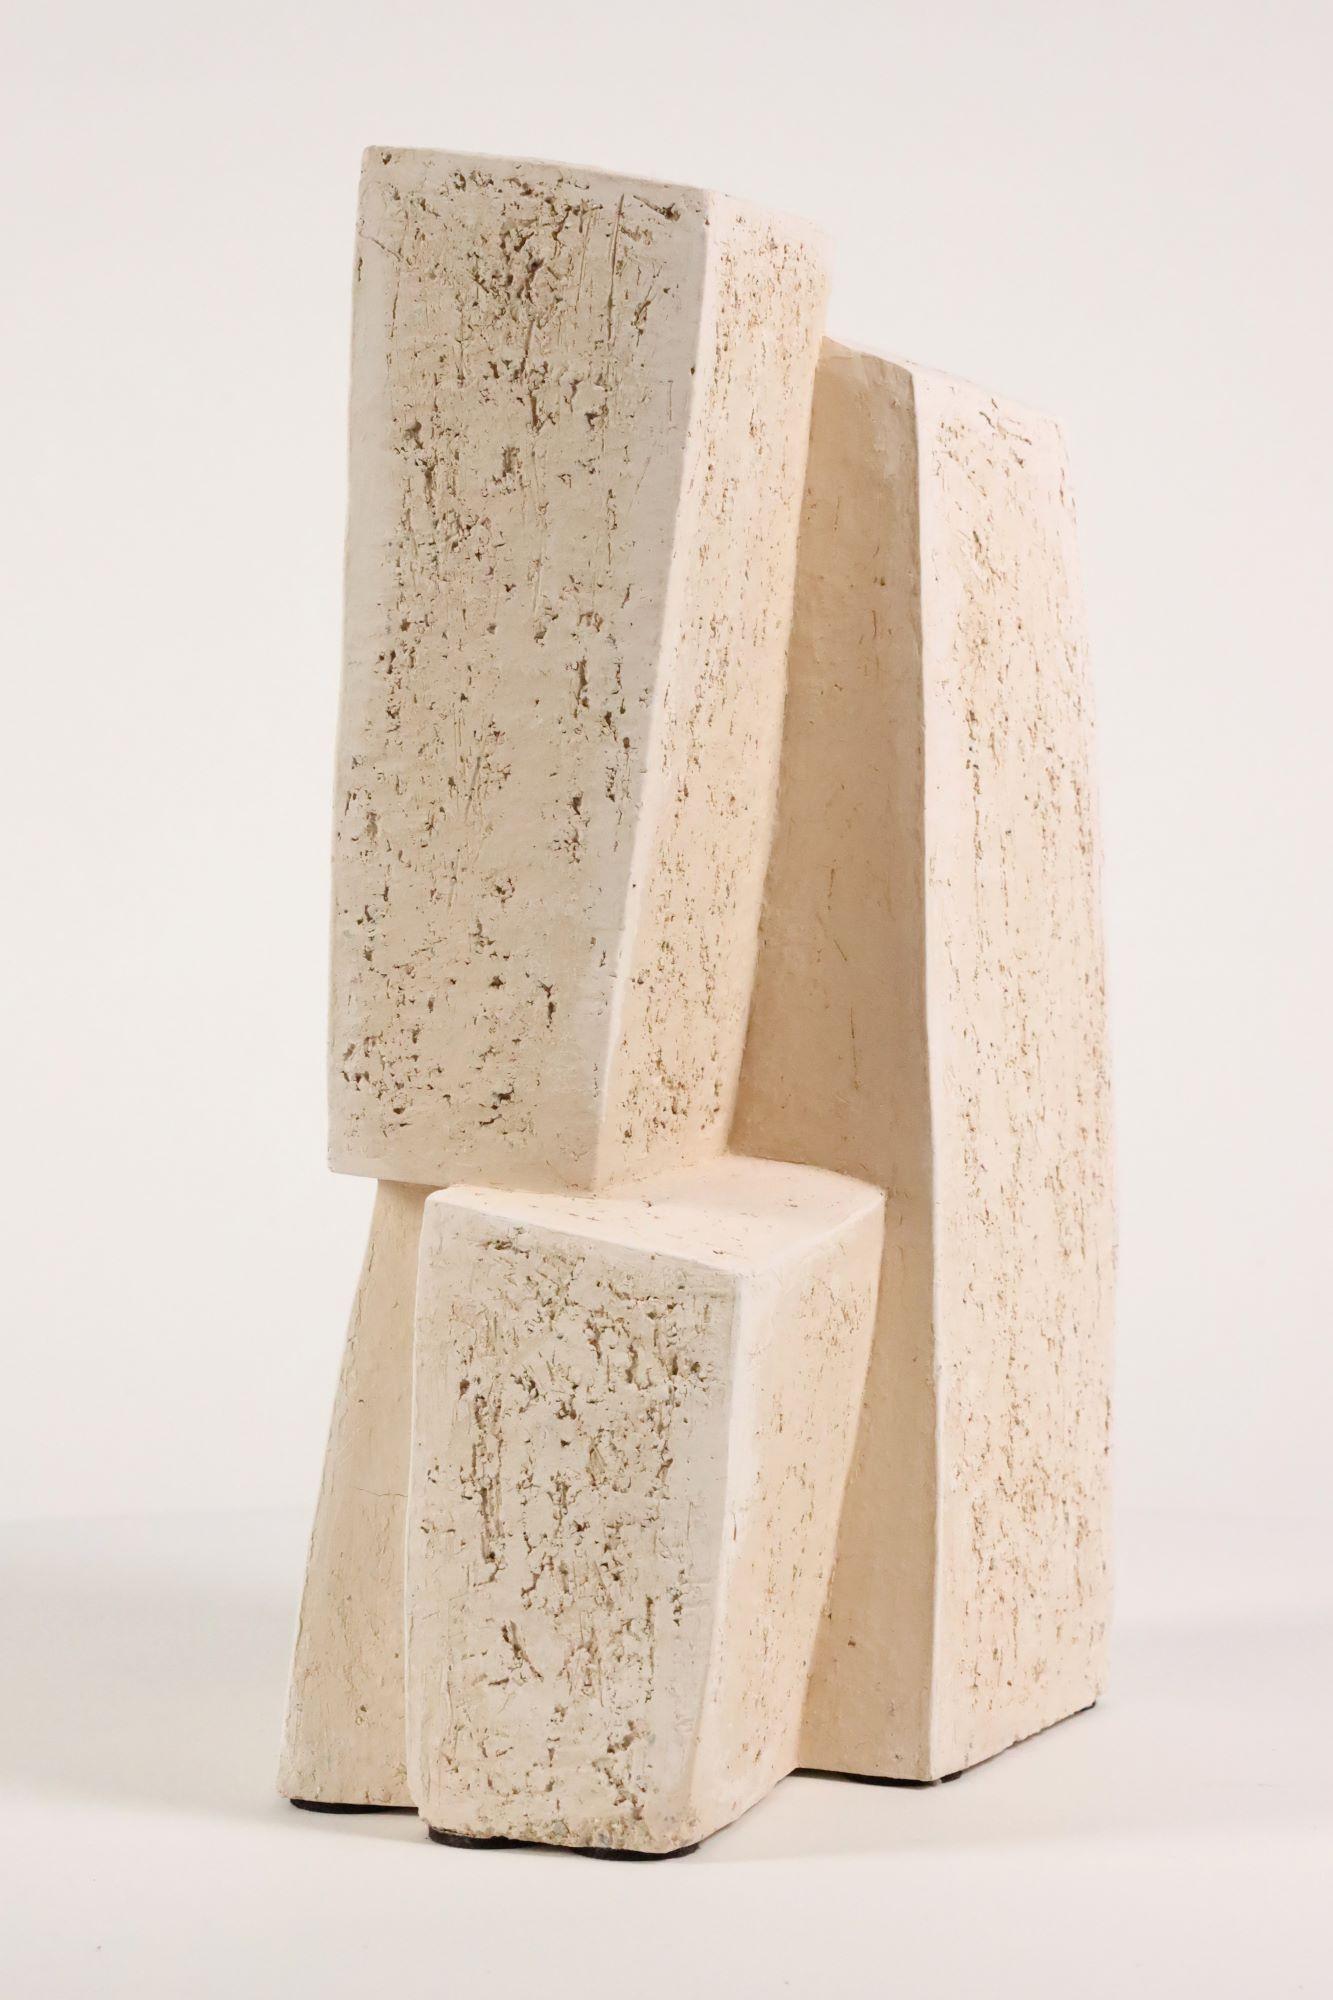 Union V by Delphine Brabant - Abstract geometric sculpture, terracotta, white For Sale 6